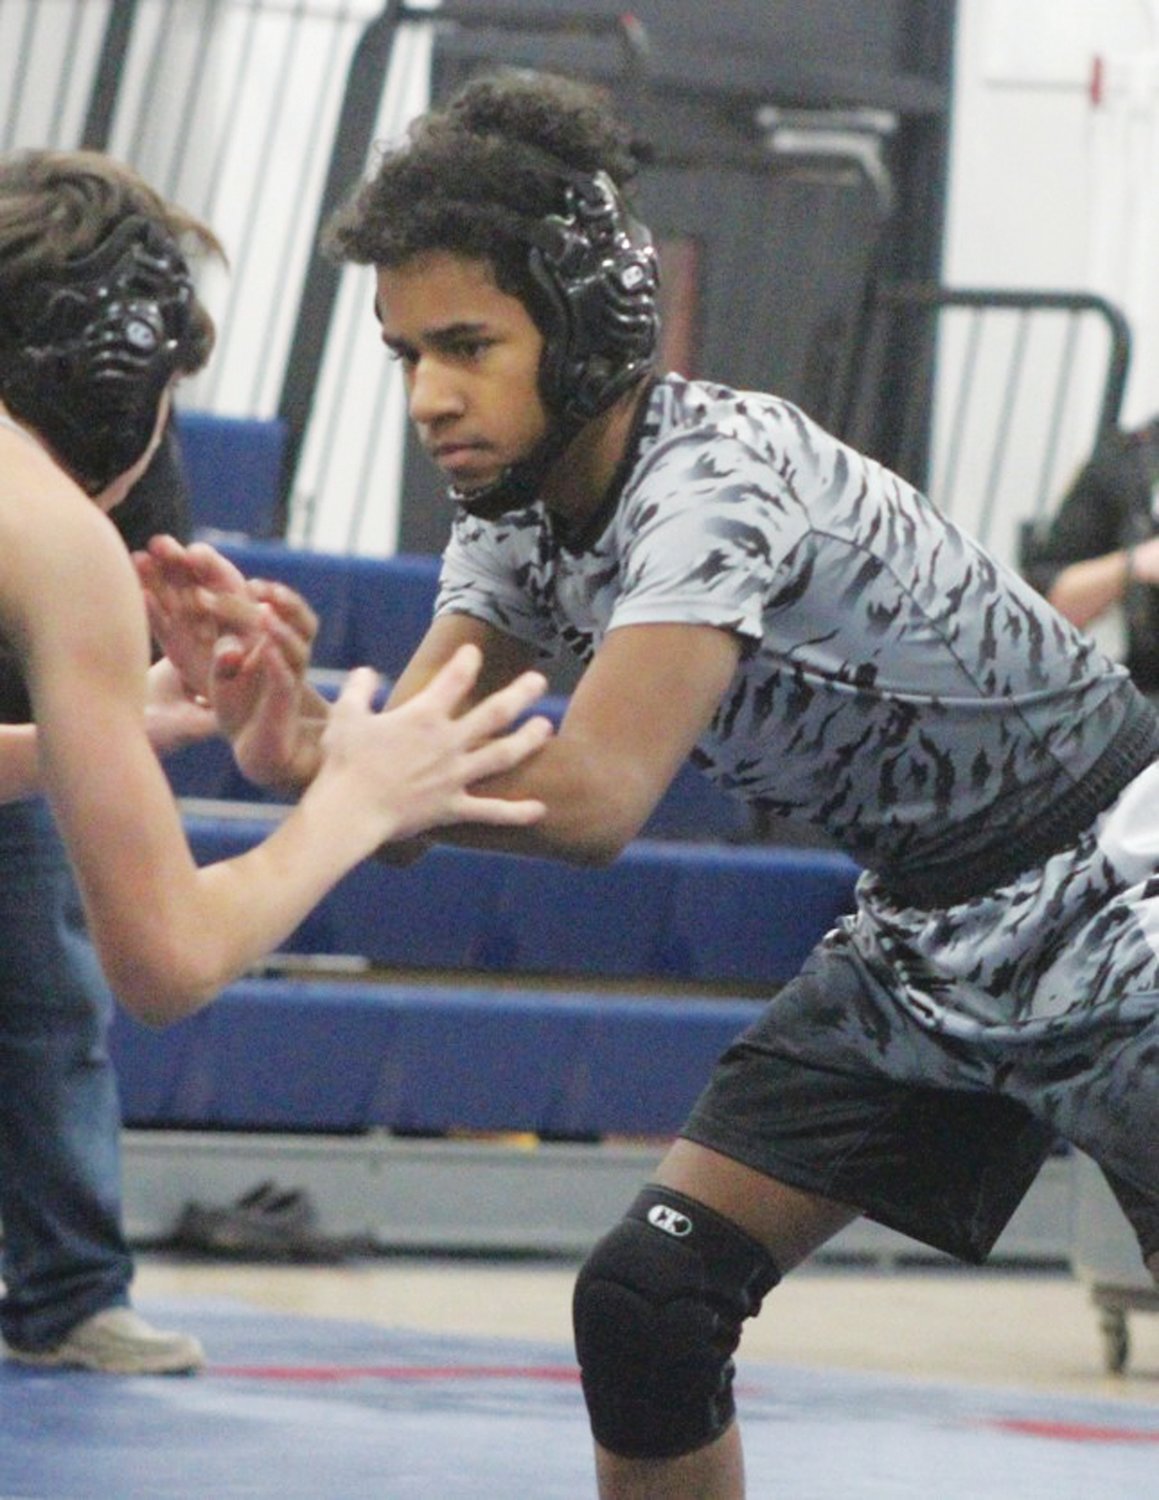 FINDING HIS RANGE: Kelvin Olea looks for a takedown. (Photos by Alex Sponseller)